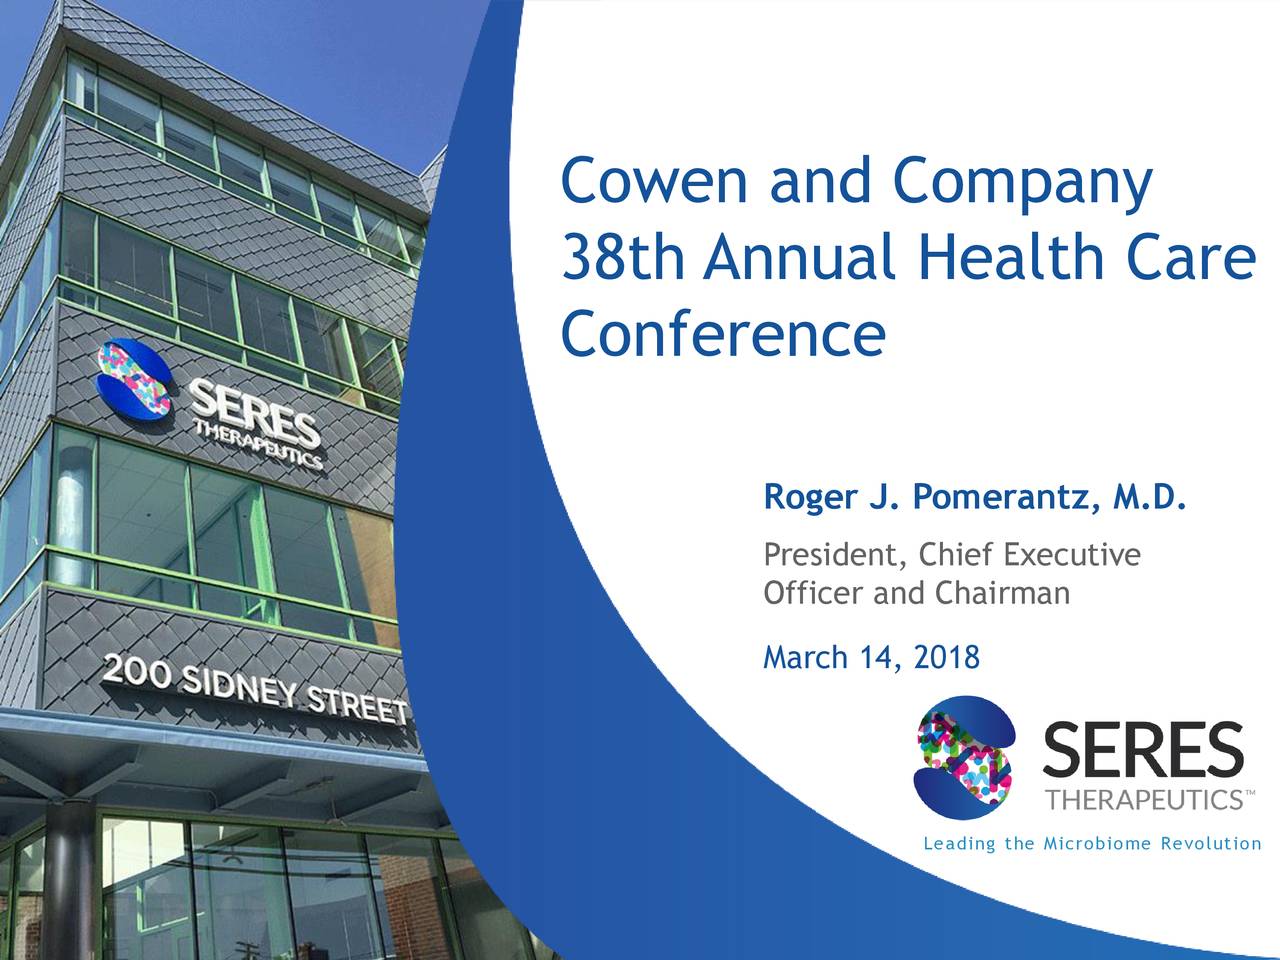 Seres (MCRB) Presents At 38th Annual Cowen And Company Healthcare